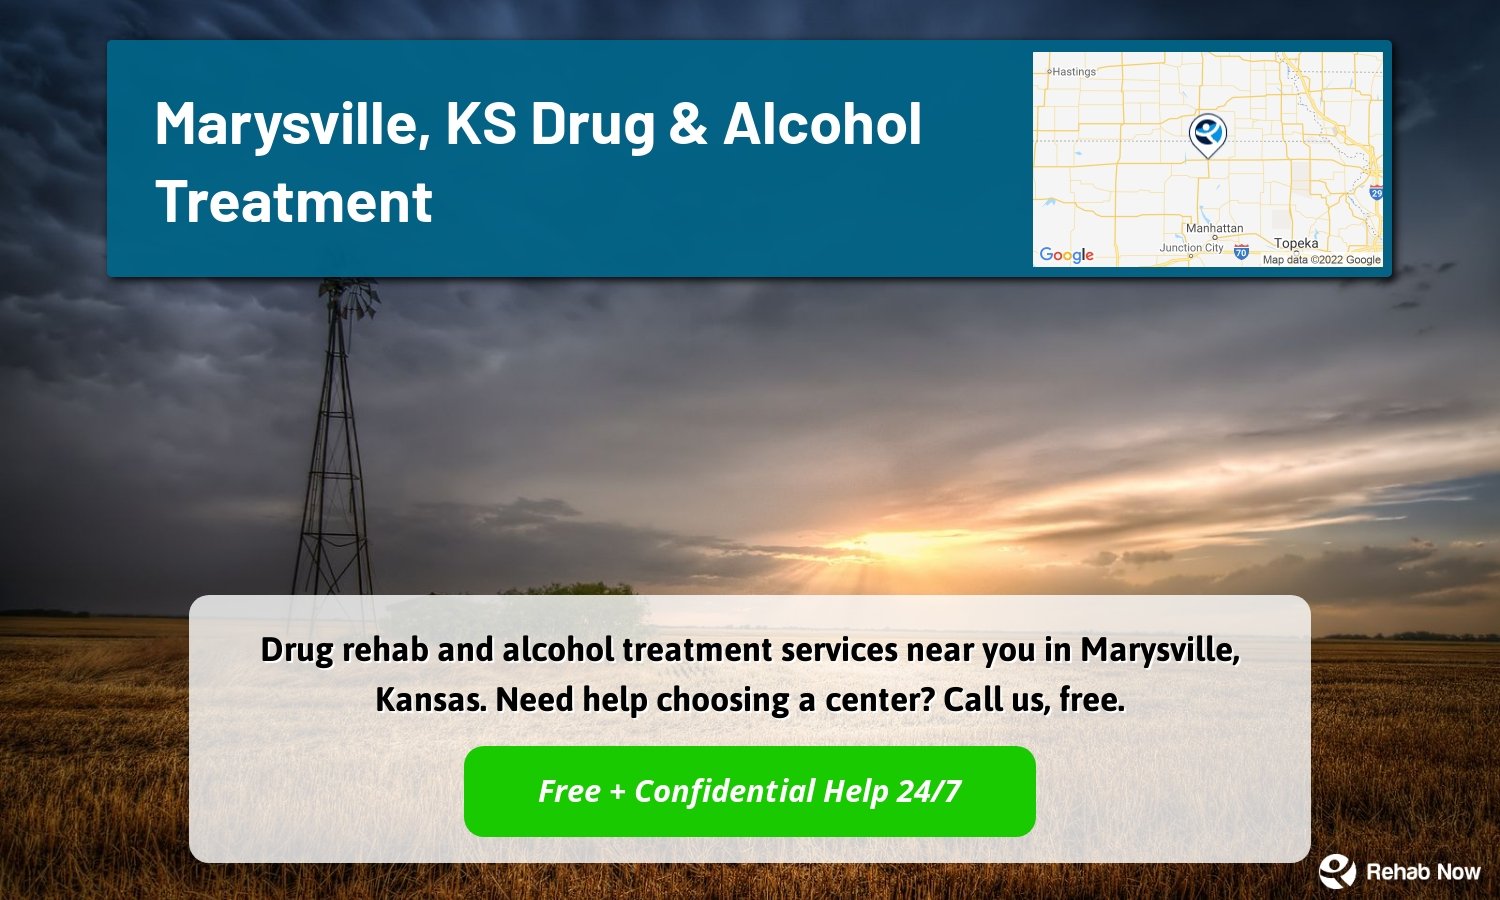 Drug rehab and alcohol treatment services near you in Marysville, Kansas. Need help choosing a center? Call us, free.